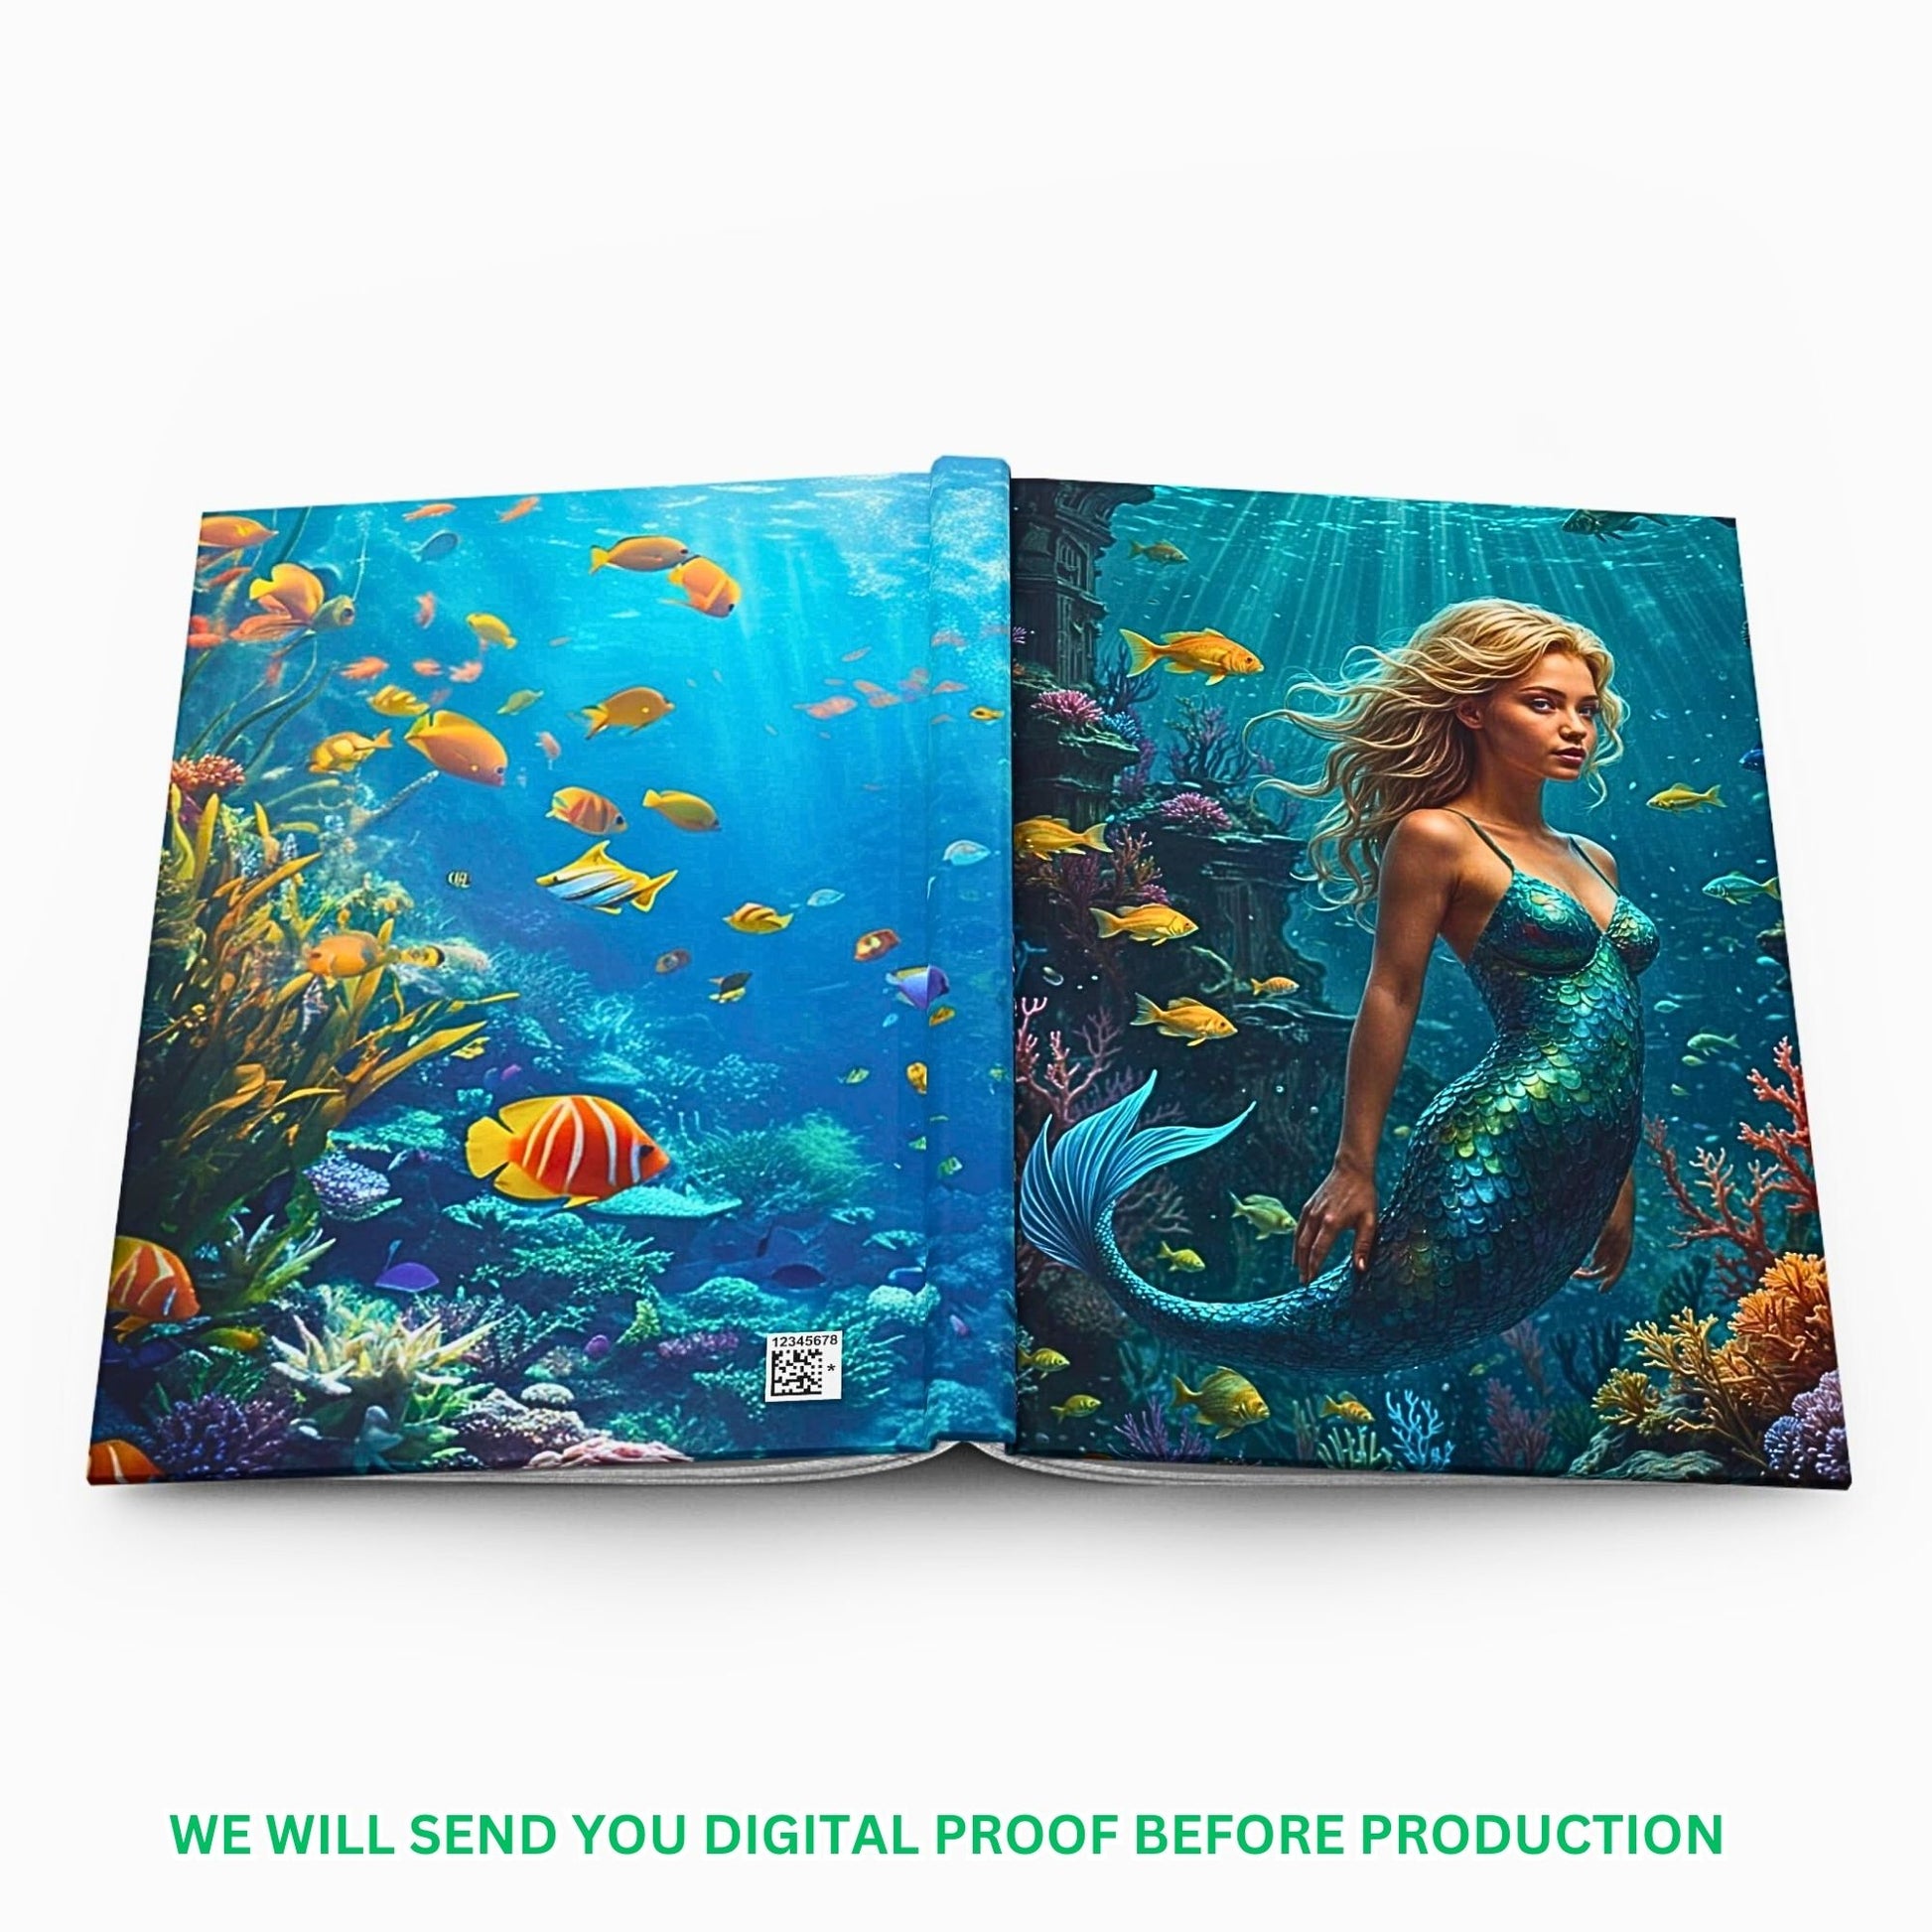 Dive into creativity with our Custom Mermaid Journal, crafted from your favorite photo. This personalized gift is a perfect choice for birthdays, offering a whimsical way for girls to cherish memories and jot down their dreams.